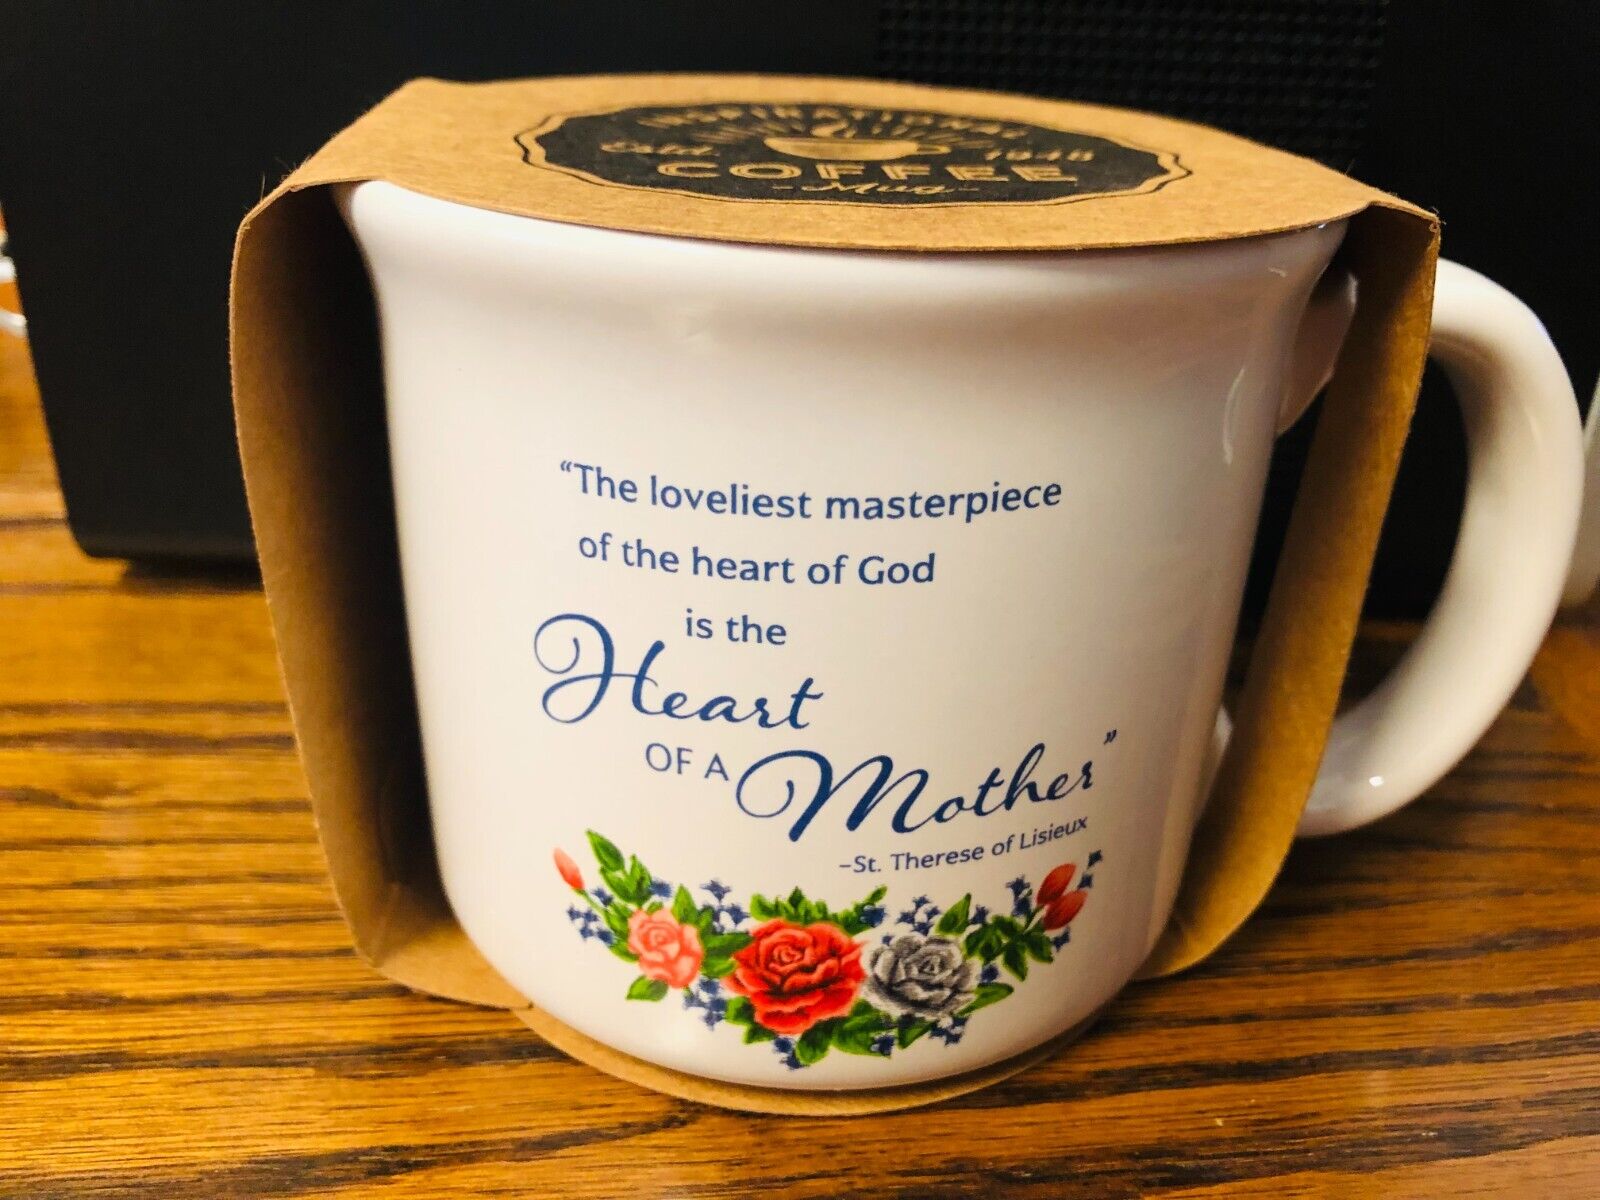 Heart of a Mother  13 oz. Mug, New - Bob and Penny Lord